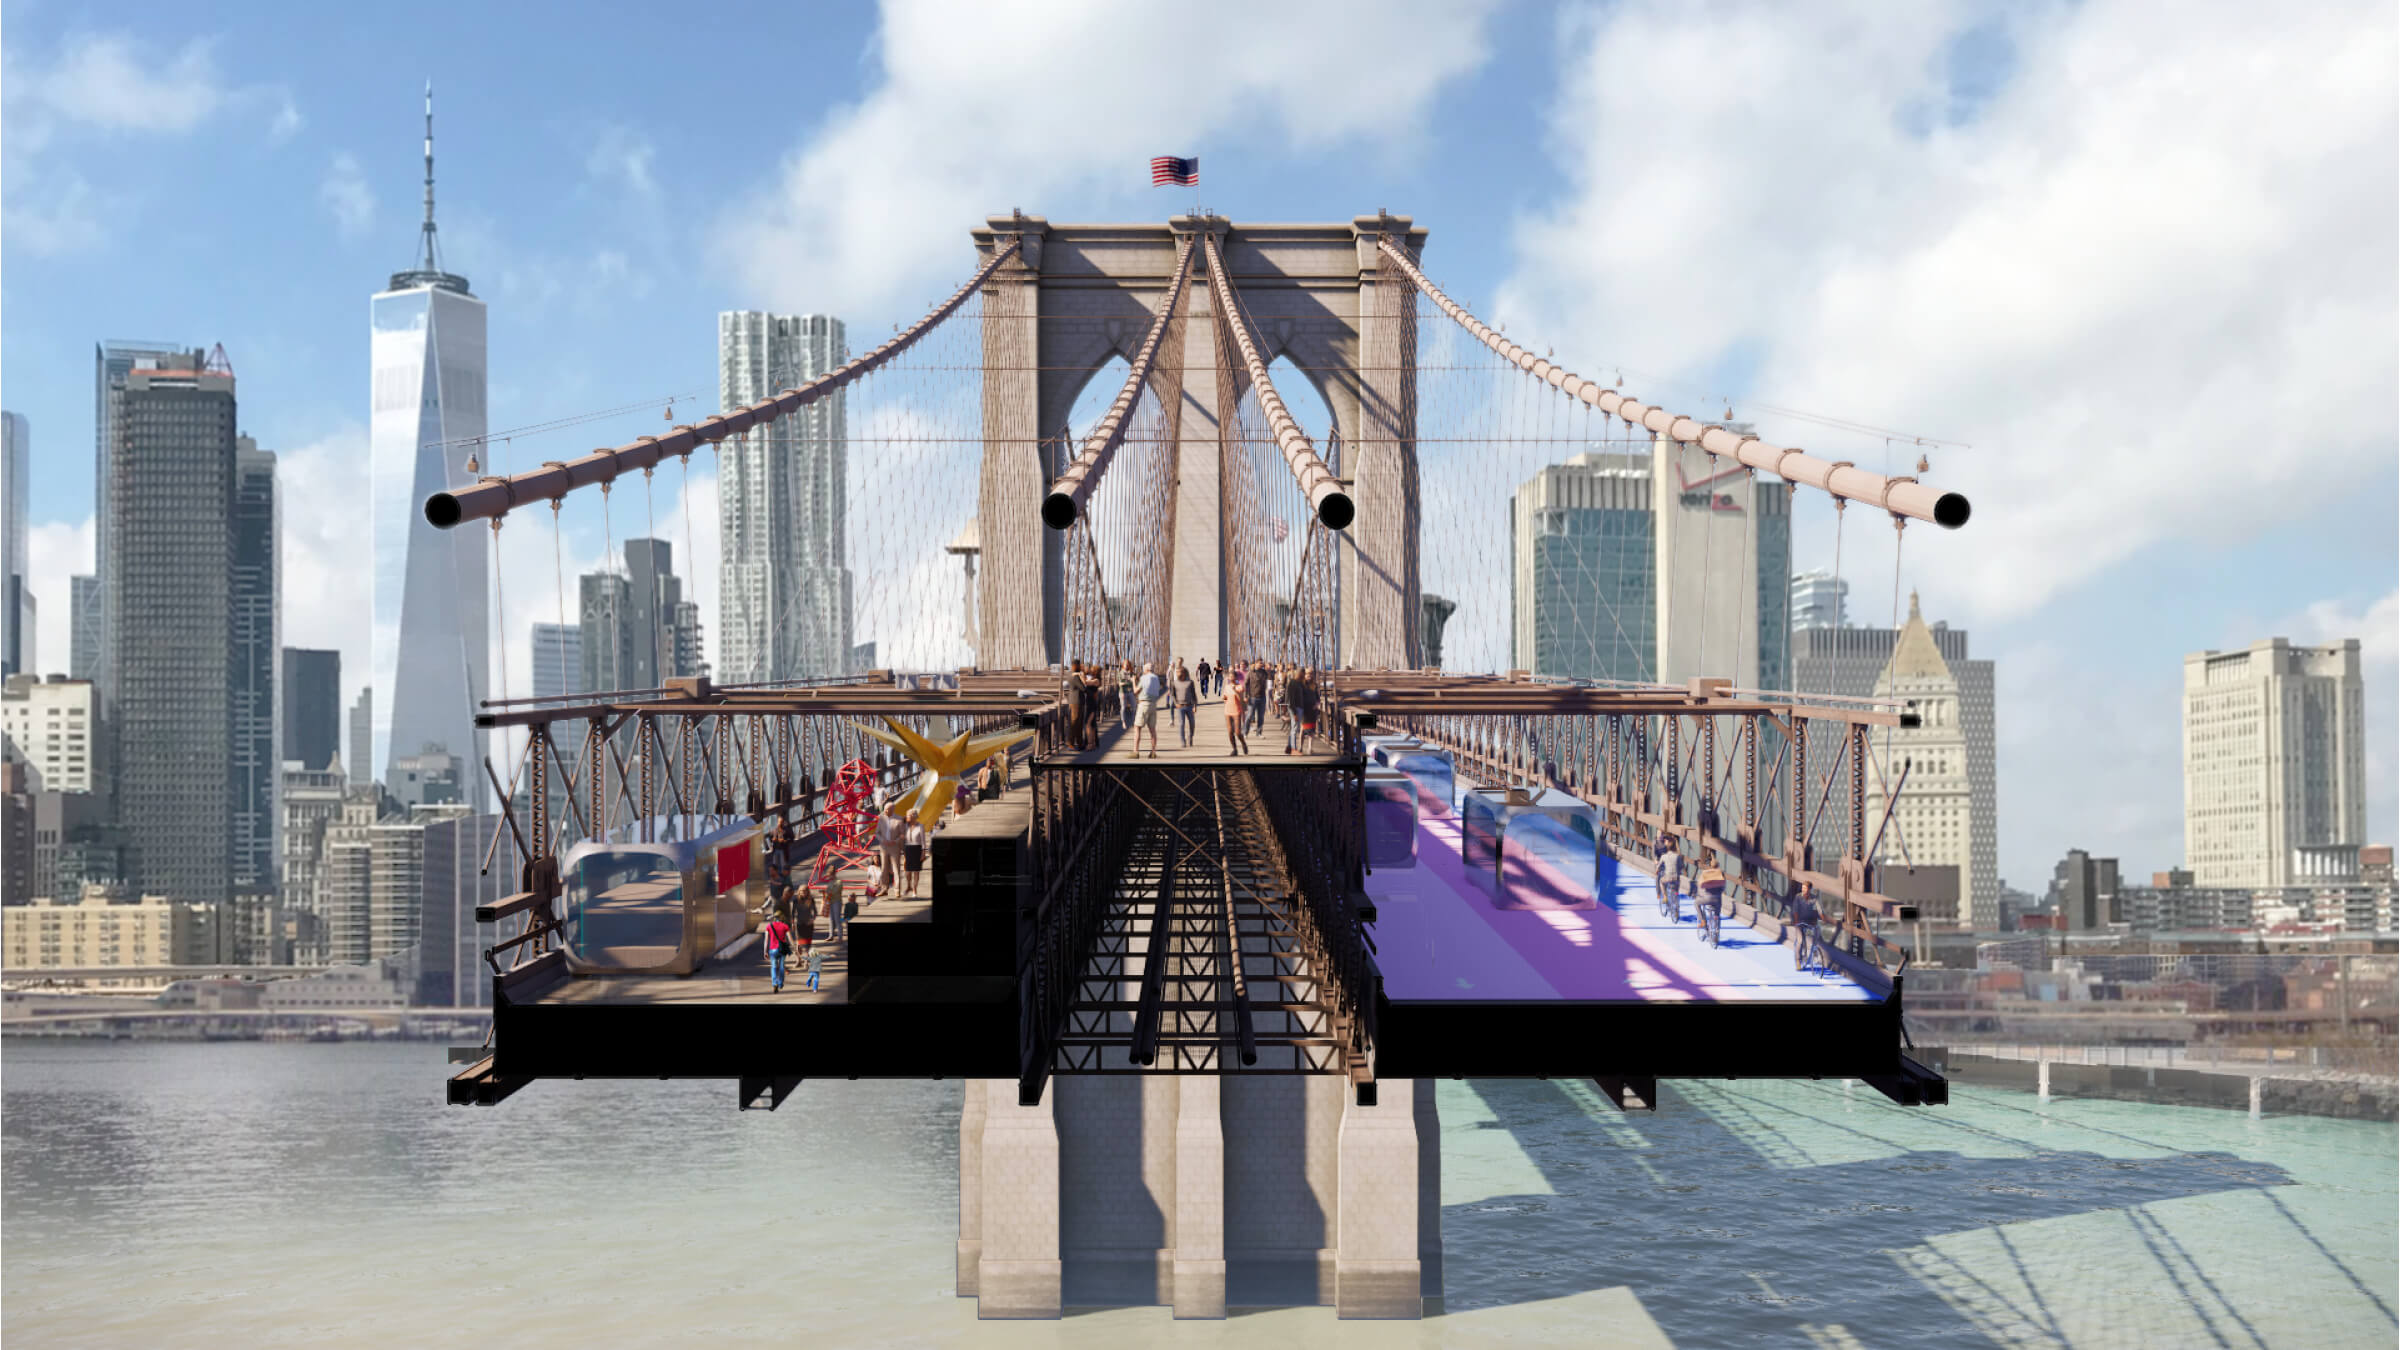 Vote now for the city’s competition to redesign the Brooklyn Bridge